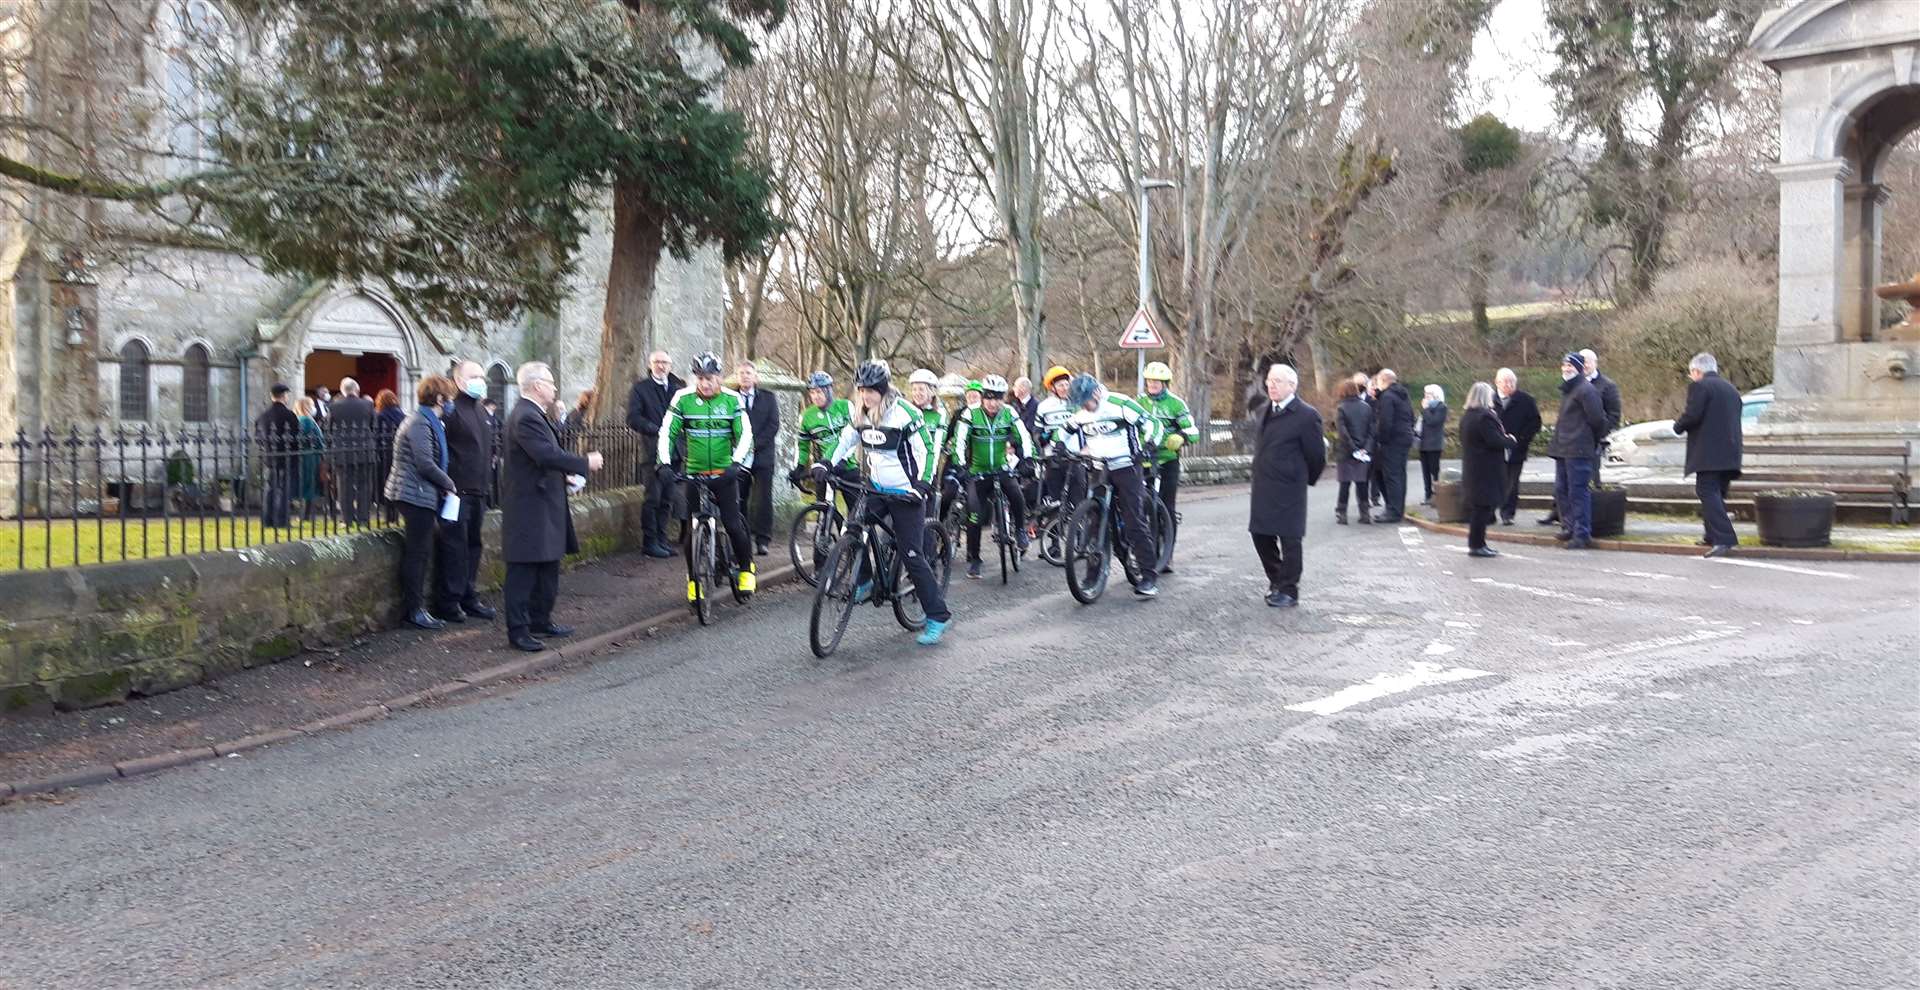 The cyclists outside Fountain Road Hall at the end of the service.